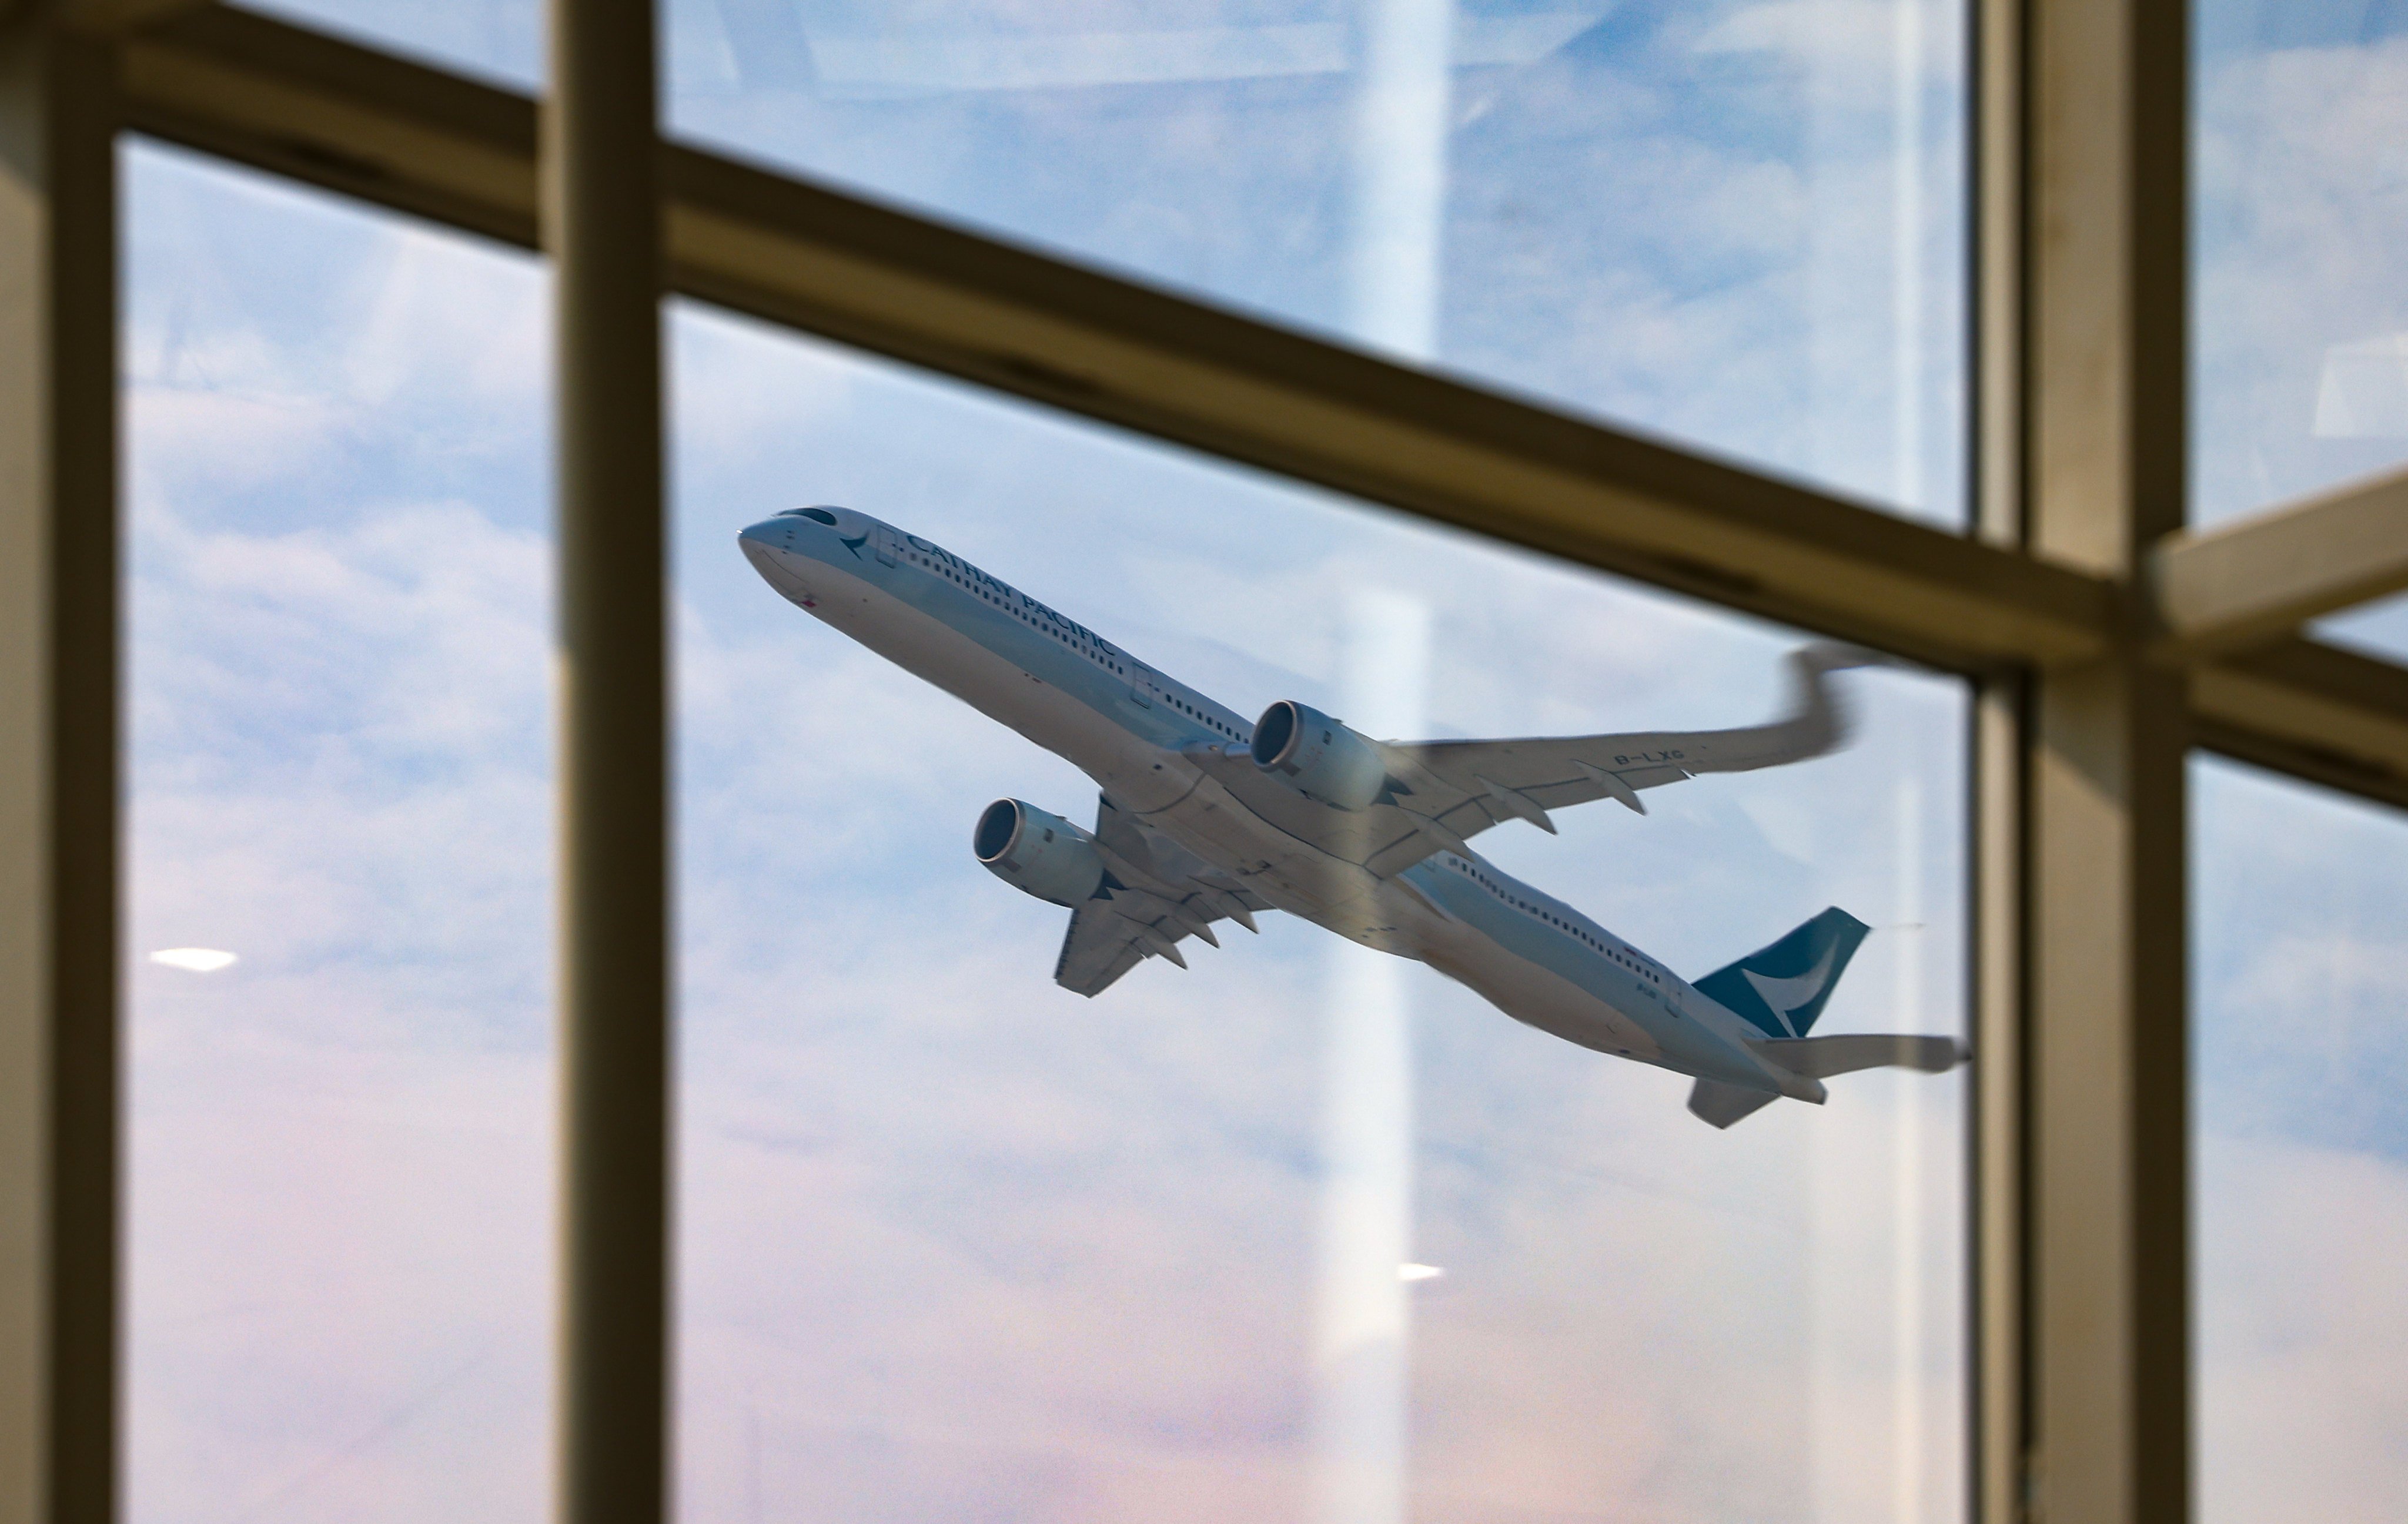 A Cathay Pacific Airways plane takes off from Hong Kong International Airport on January 11. Photo: Dickson Lee